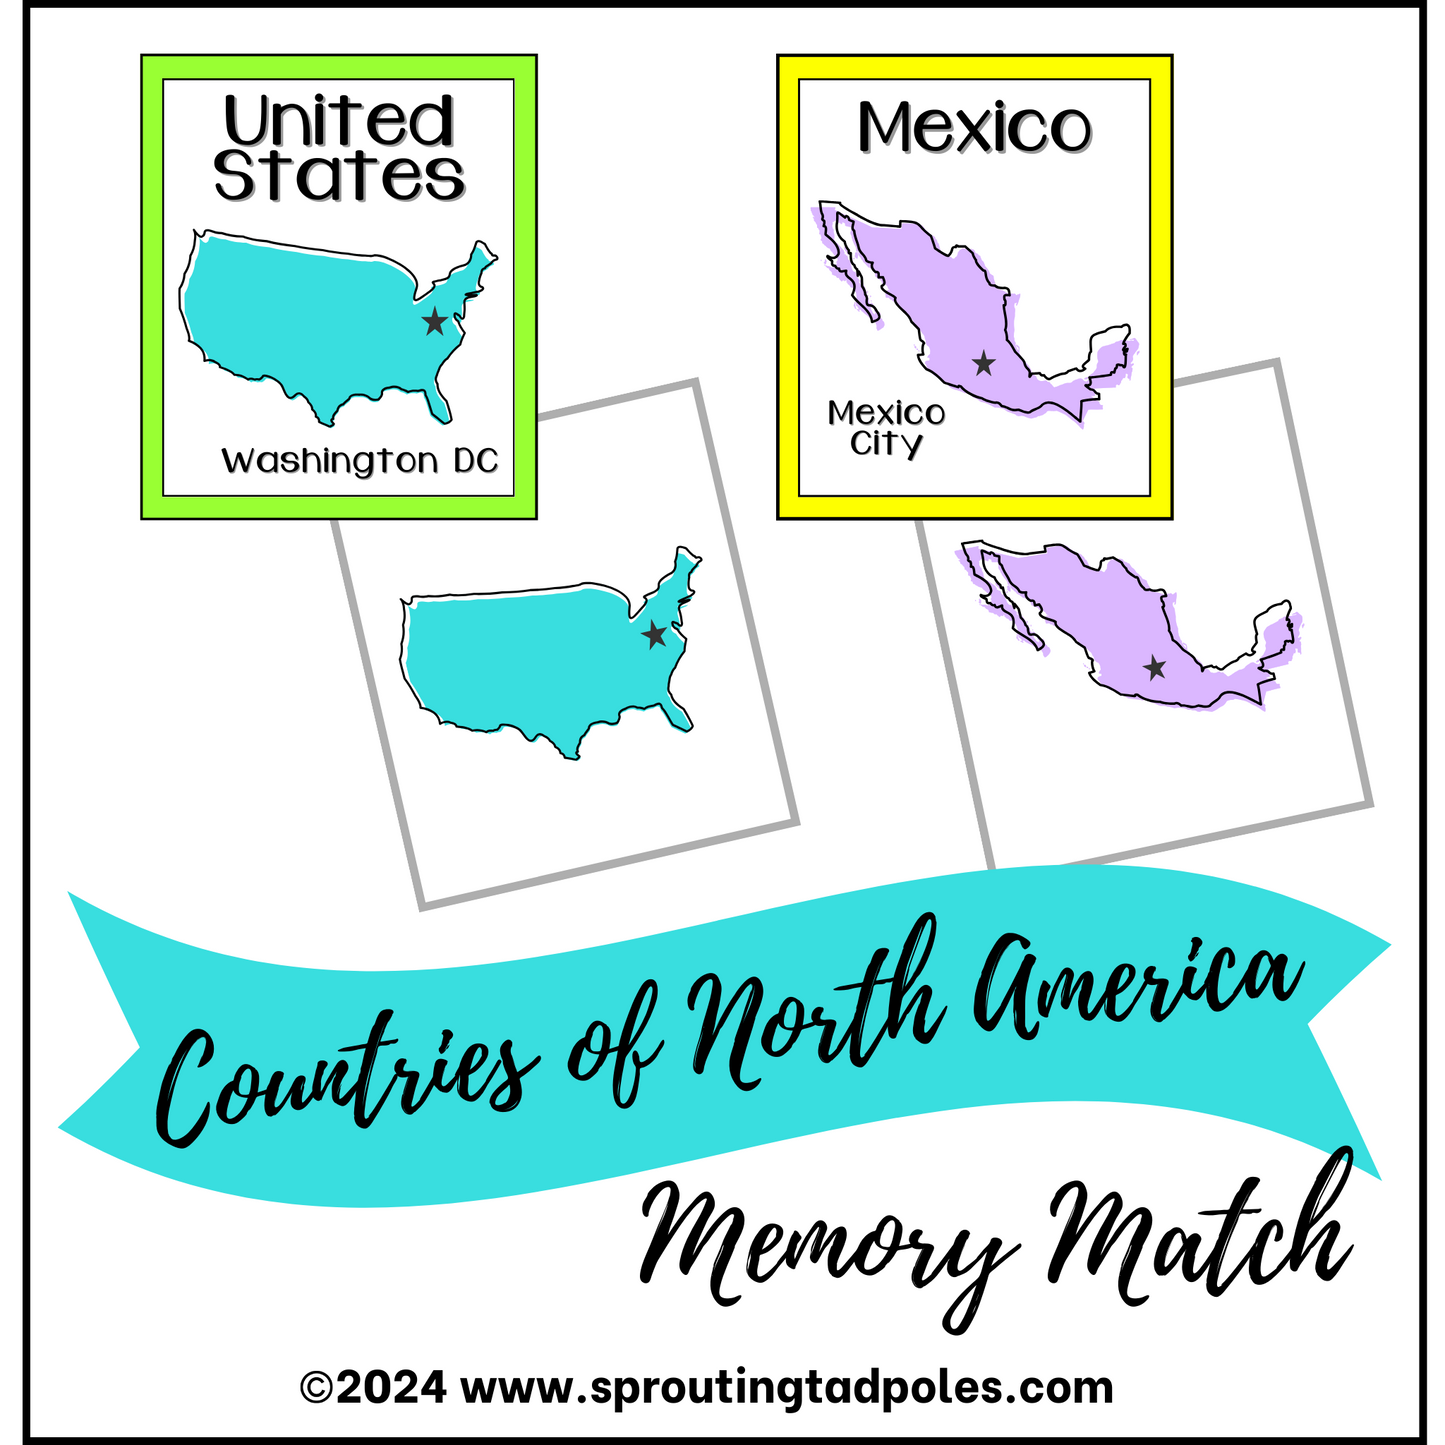 Countries Around the World Memory Match - PHYSICAL & DIGITAL VERSION